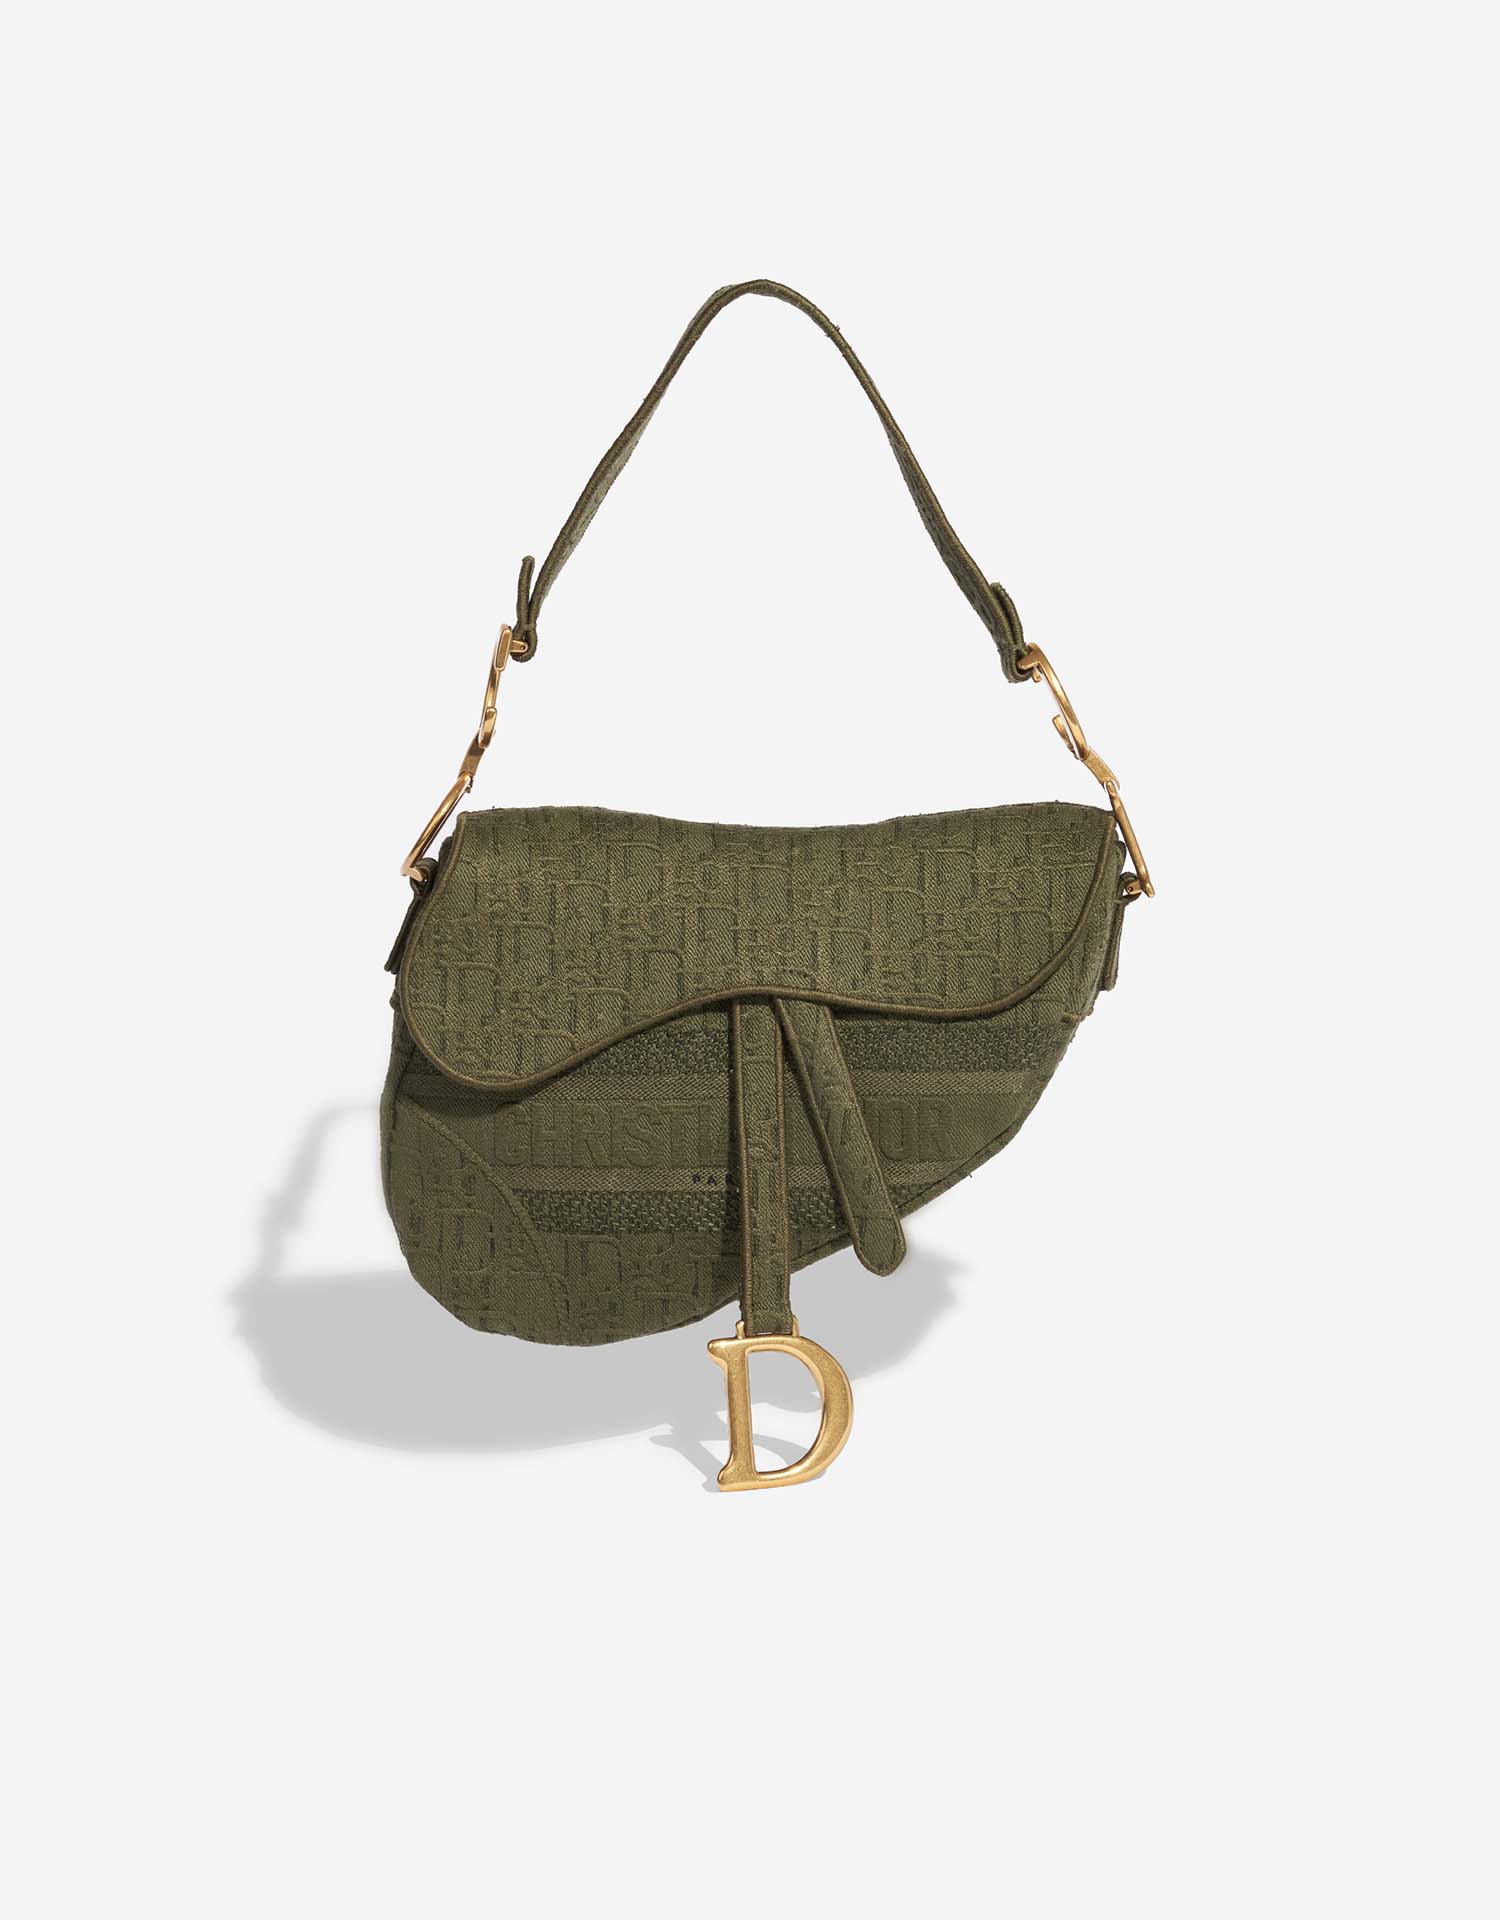 The New 'It' Bag To Add To Your Summer Wish List - Grazia